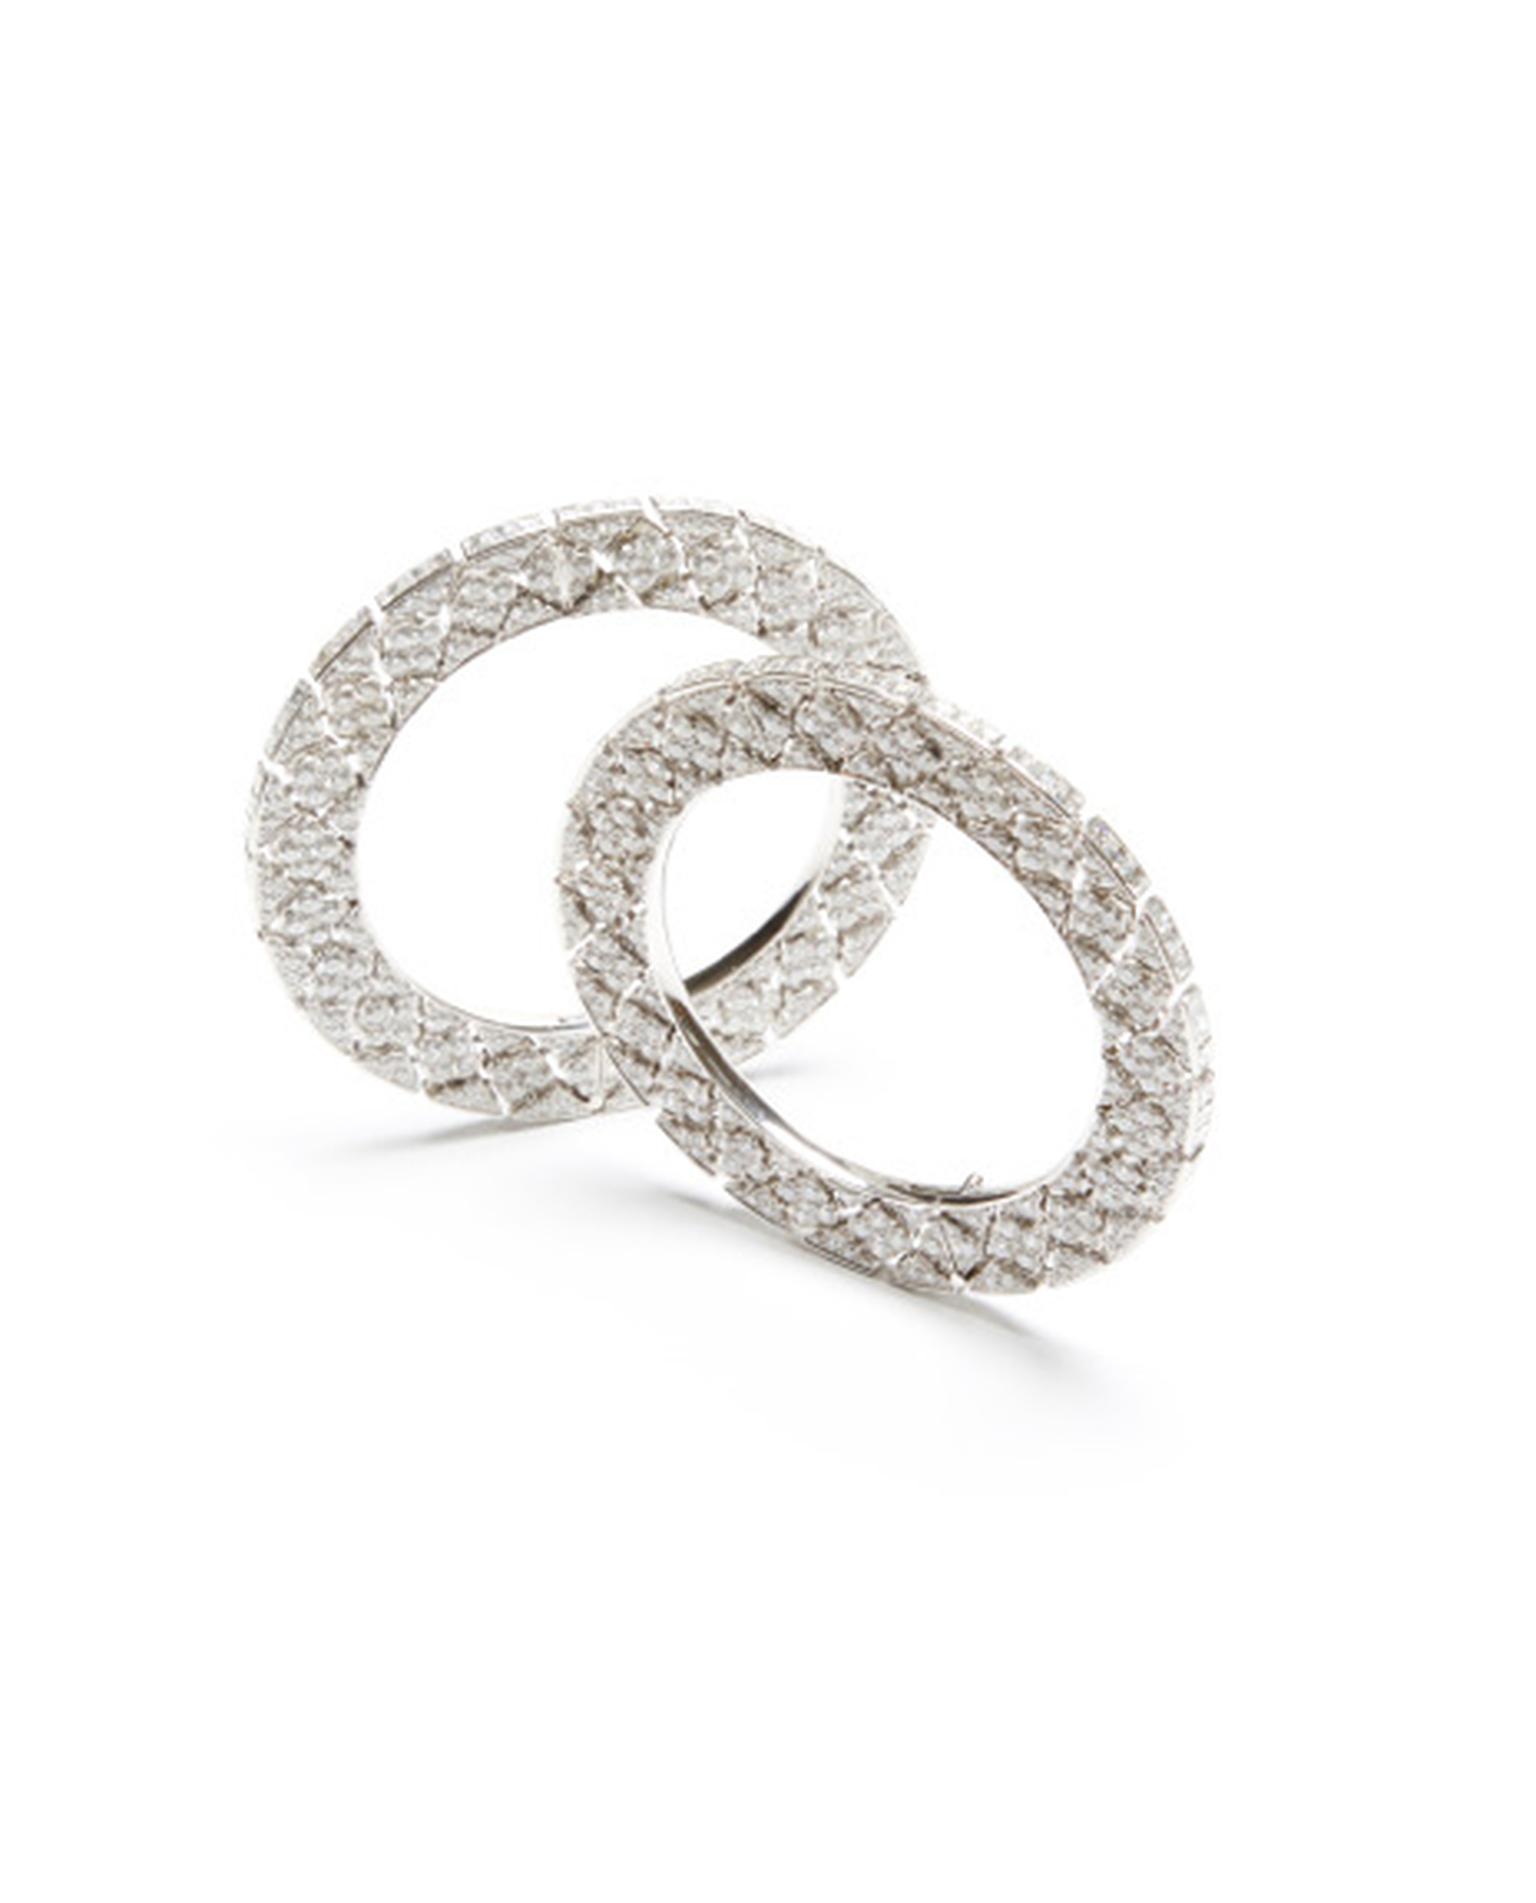 Pair of diamond bangles by famed Indian jeweller Bhagat set with 50.66ct diamonds and an additional 21.12ct of carré-cut diamonds. $480,000 at Moda Operandi.